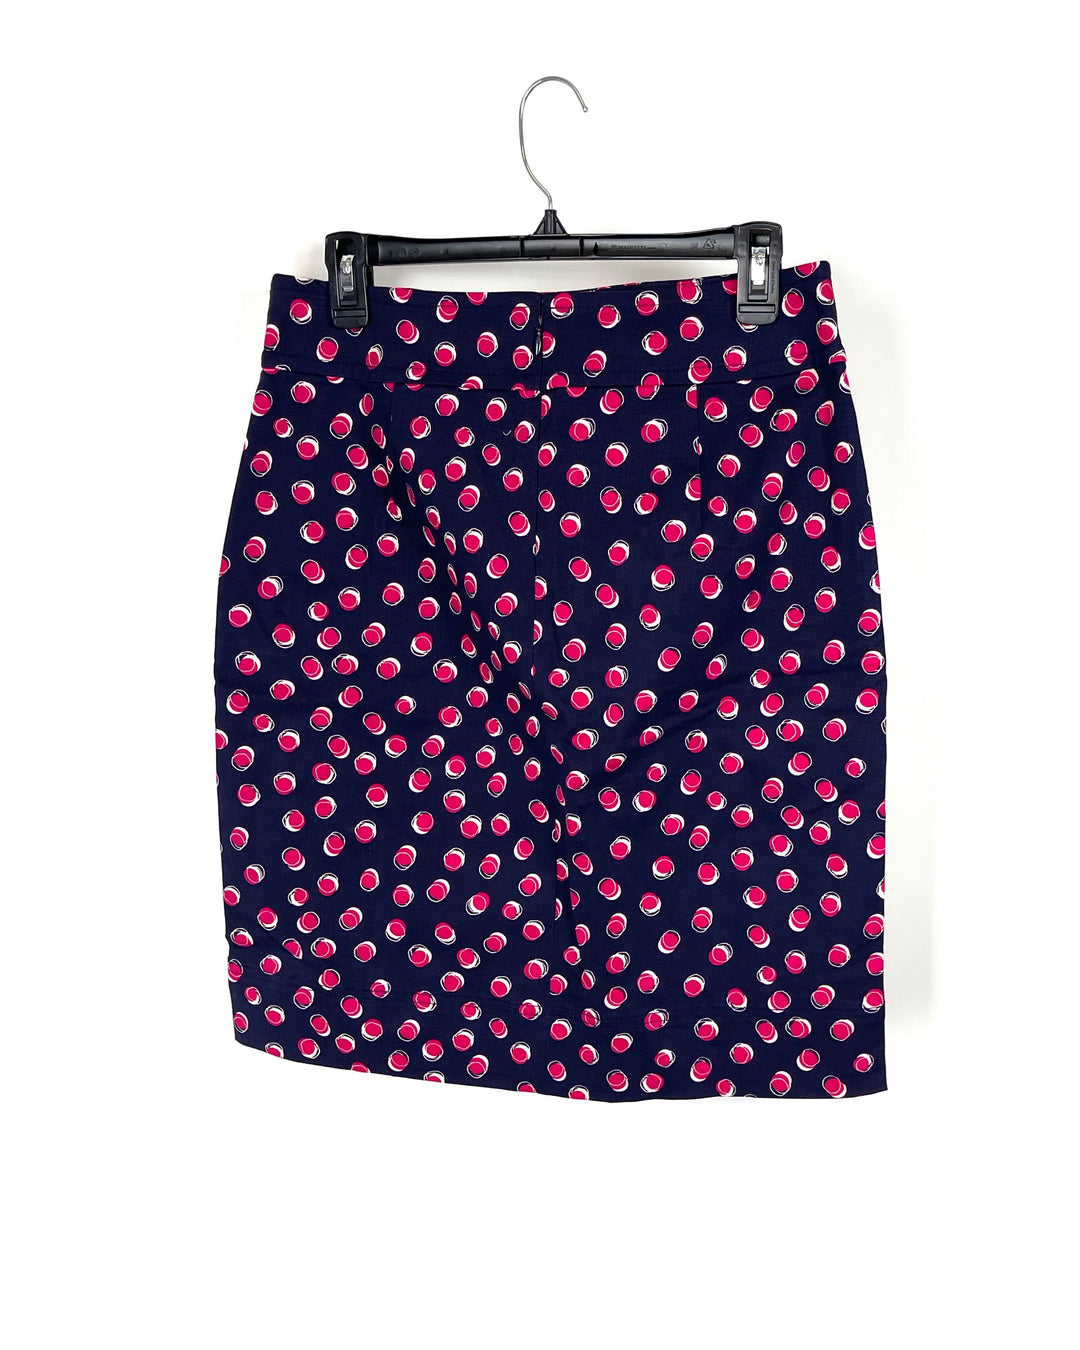 Navy Blue Skirt With Pink Polka Dot Print - Size 4